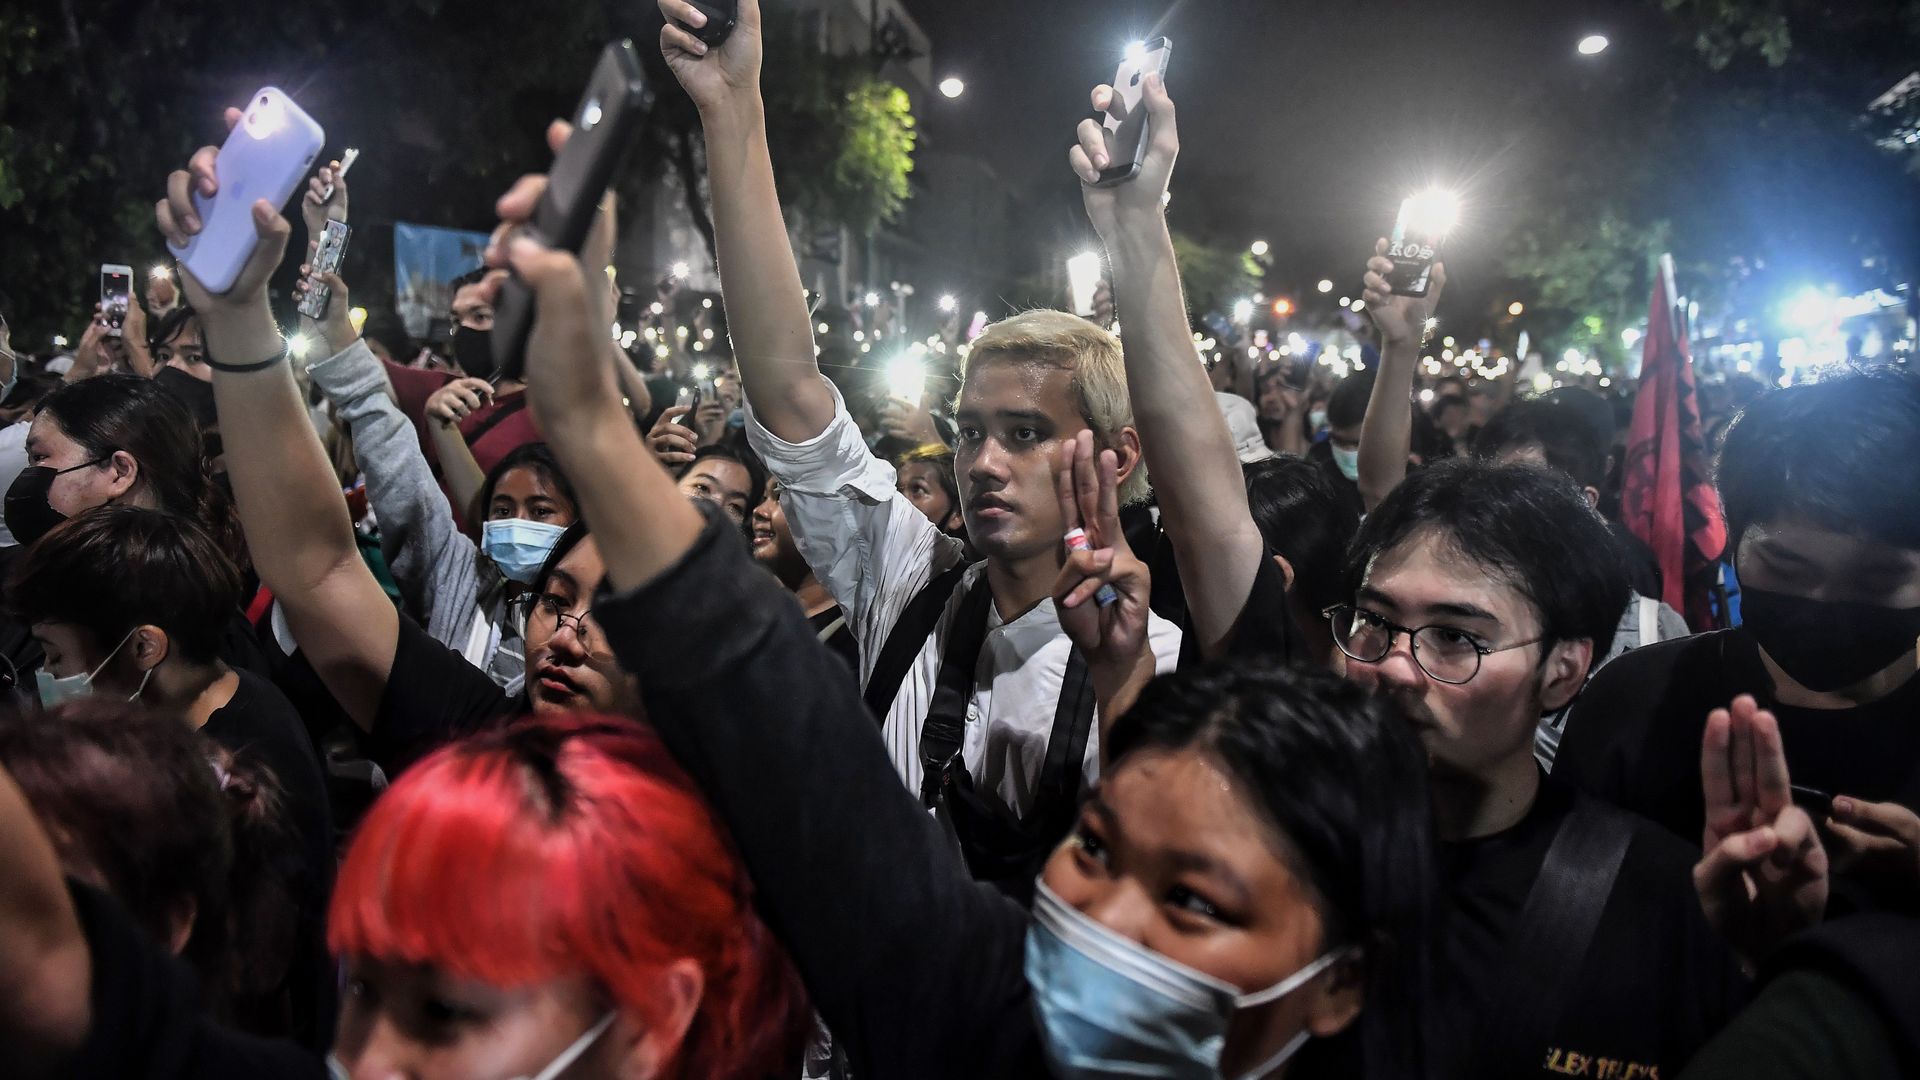 Pro-democracy protesters give the three-finger salute as they hold up their mobile phones with lights while gathering outside the Government House in an anti-government rally in Bangkok on October 14